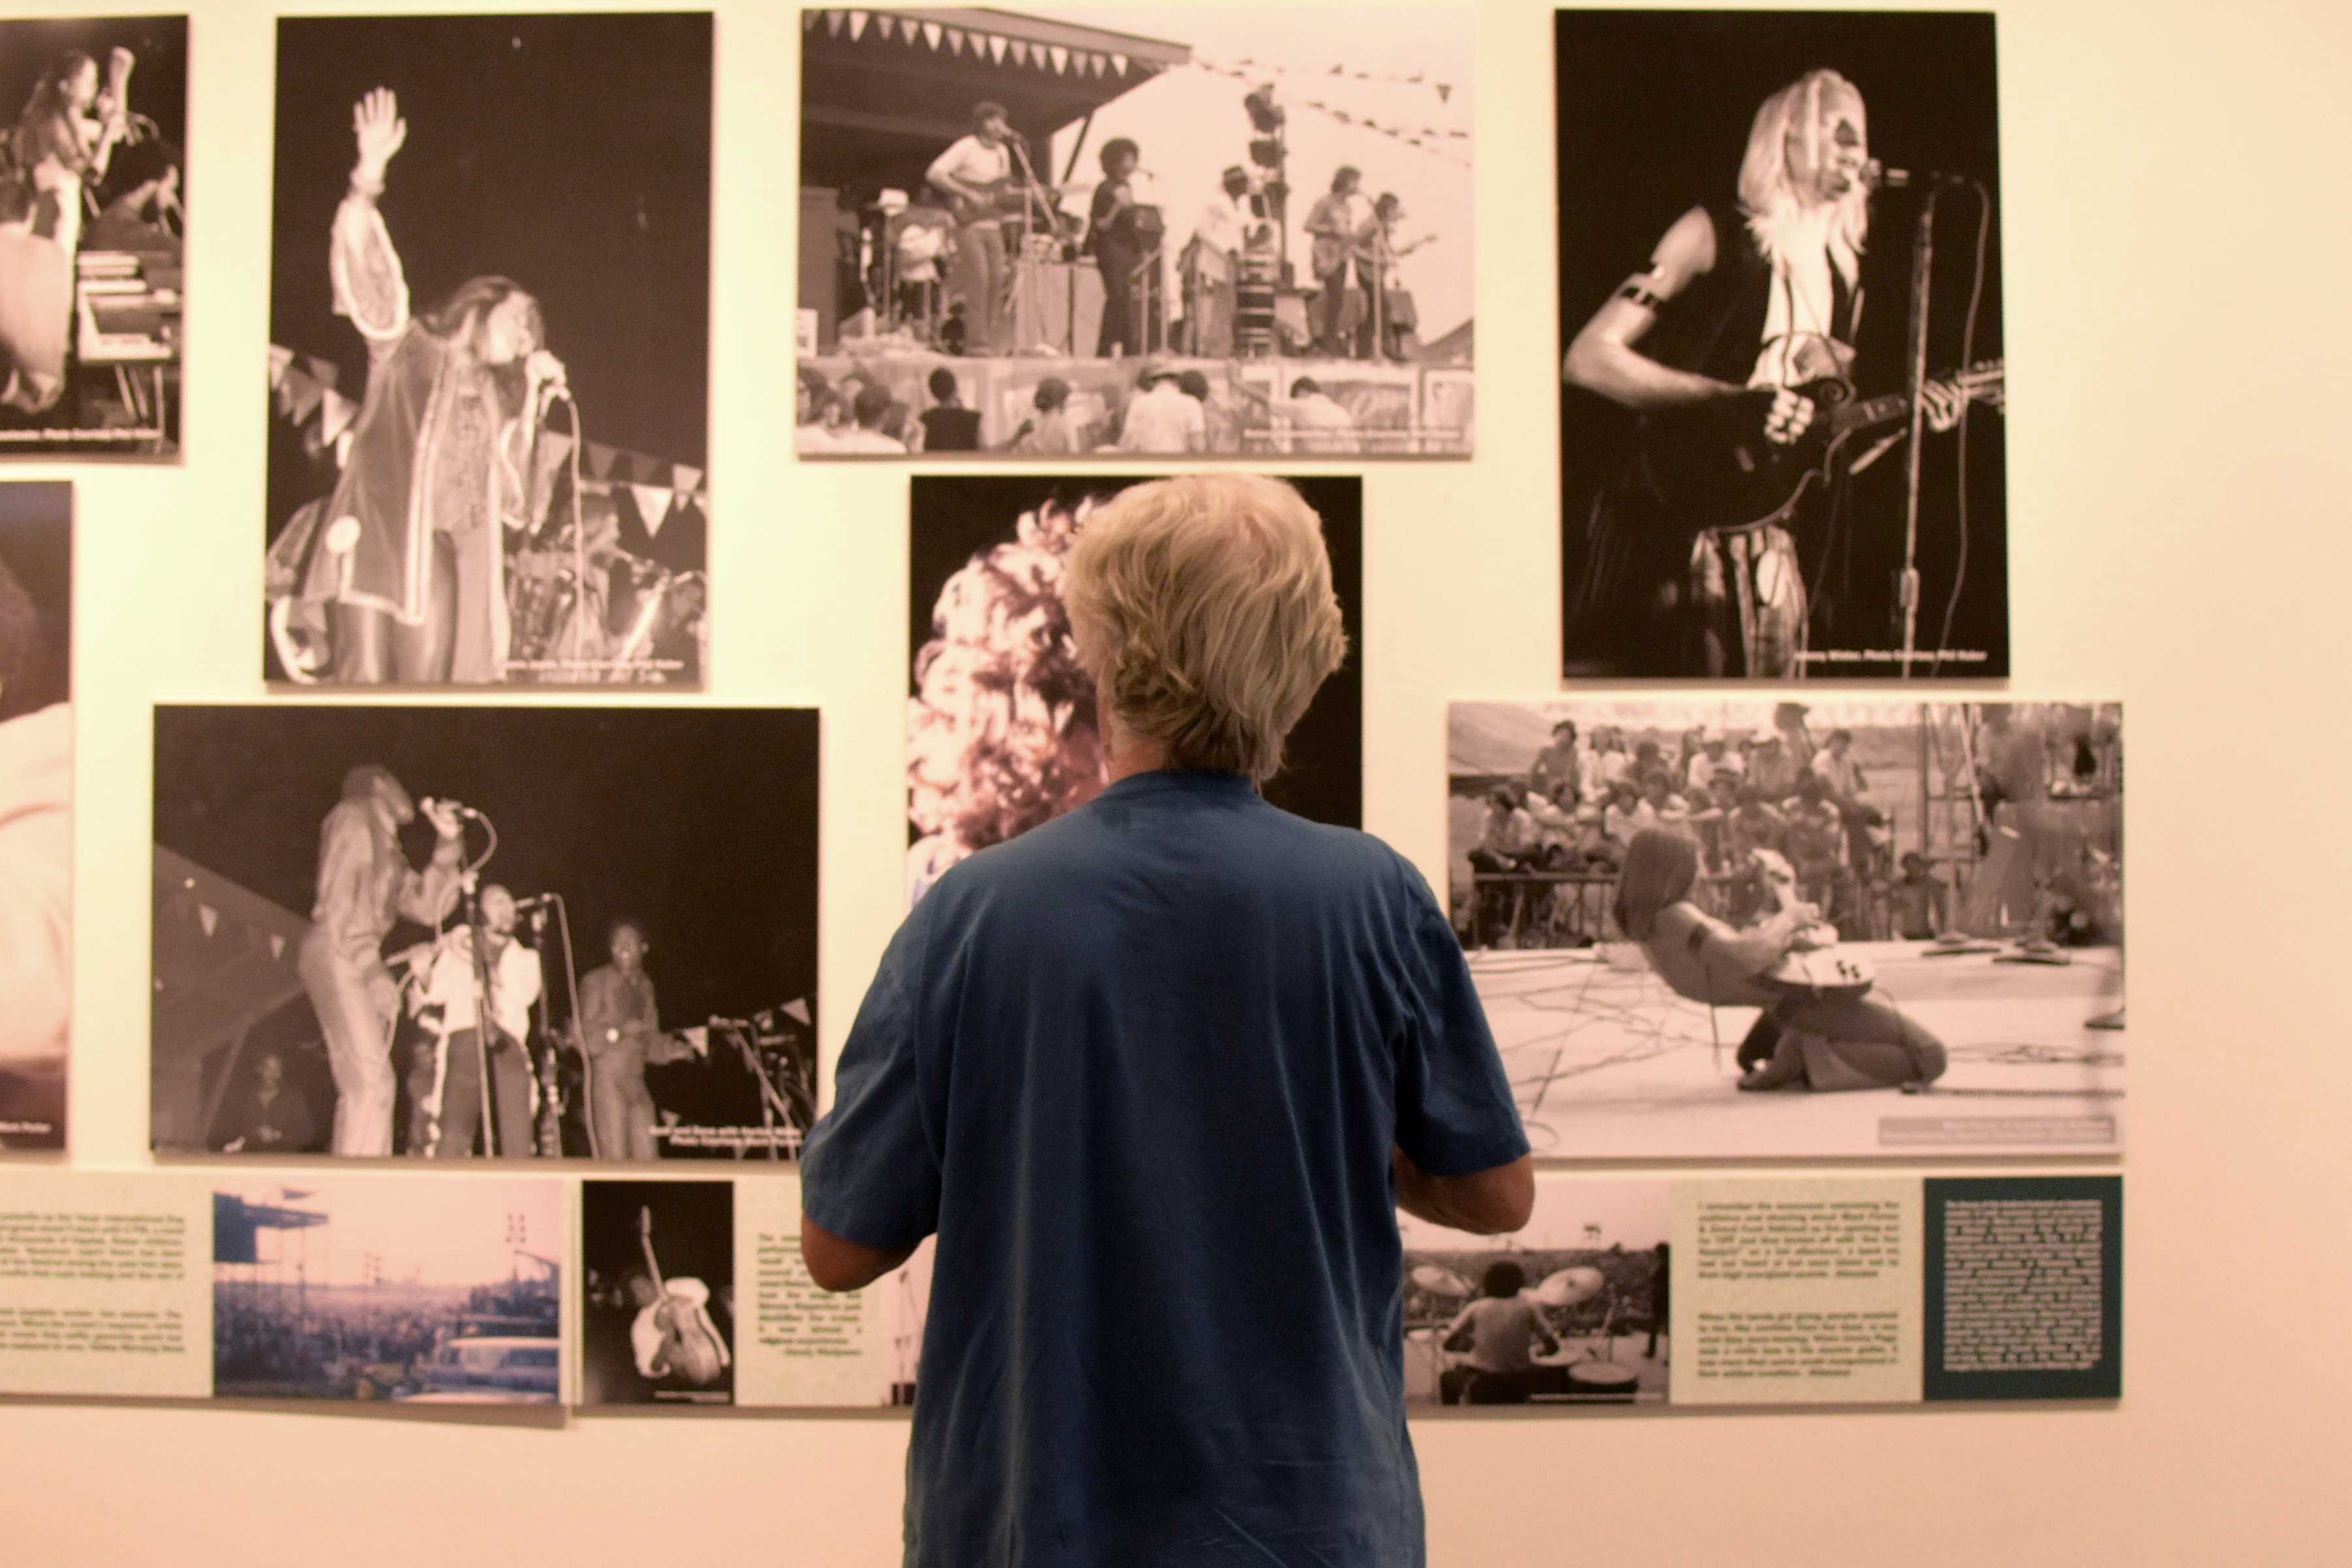 Photos by Brandon Donner | An attendee of the Denton exhibit commemorating the 50th anniversary of the Texas International Pop Festival views a wall of photos from the festival shot in 1969